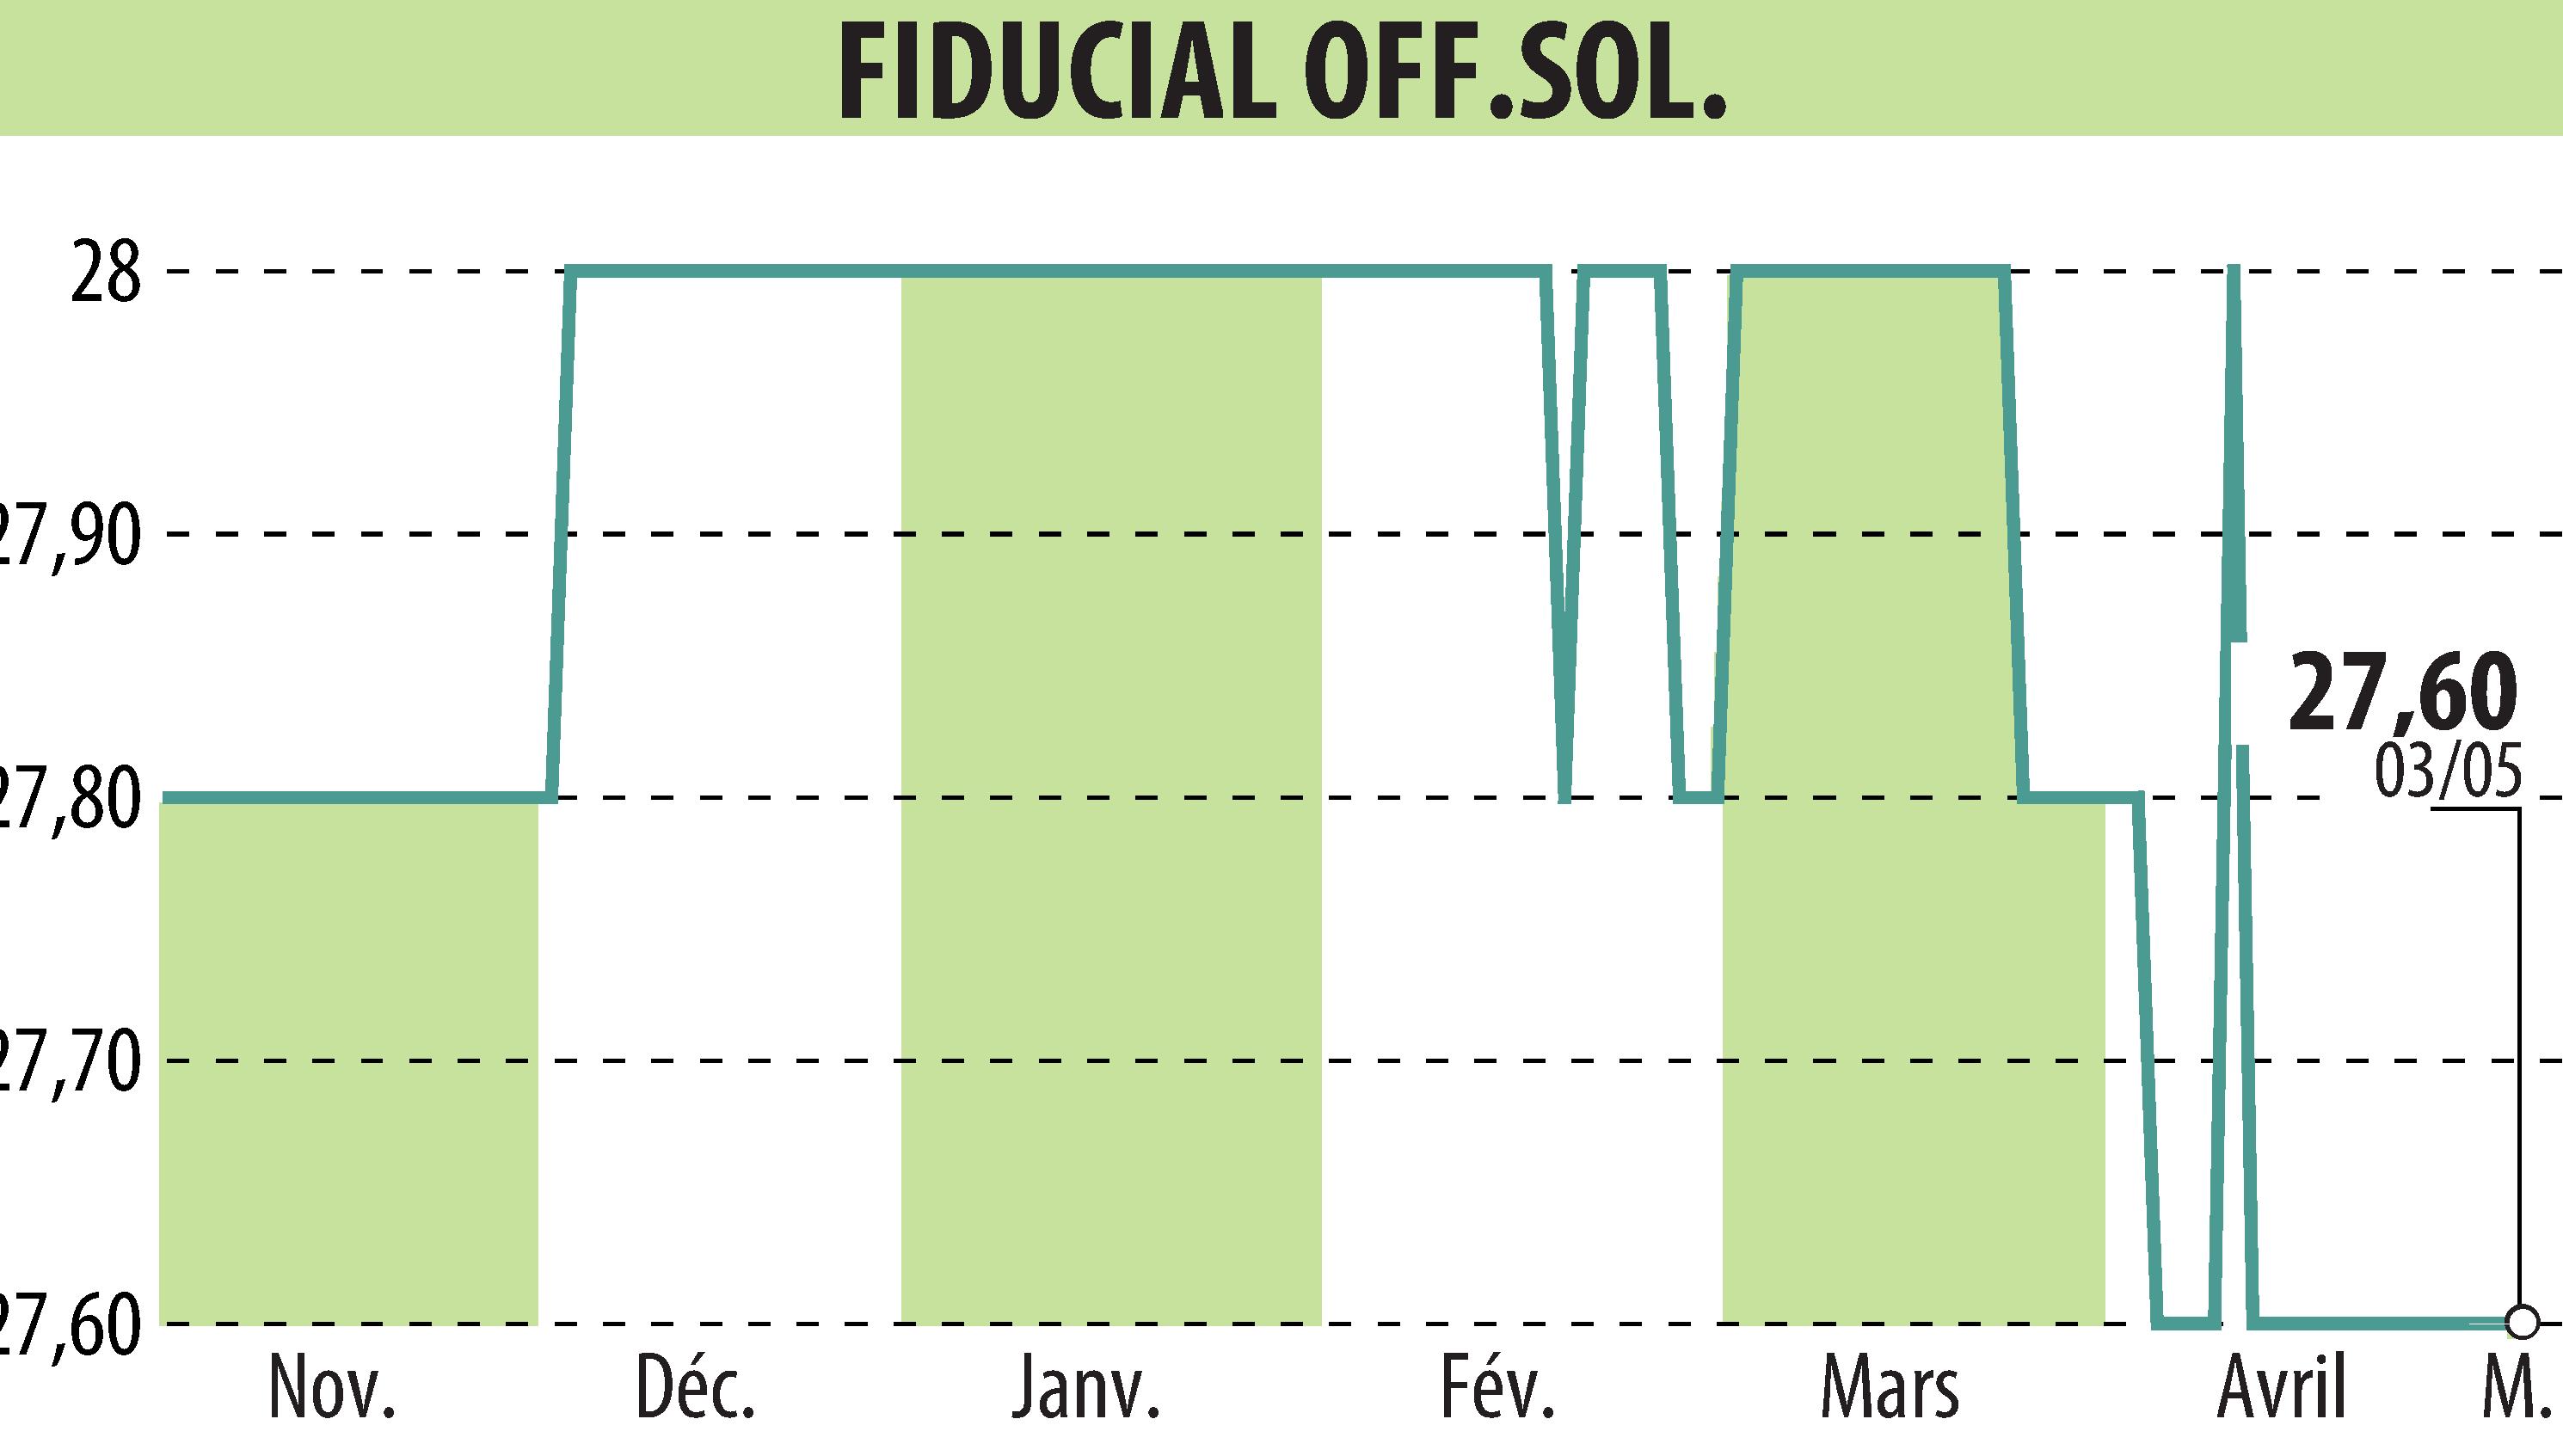 Stock price chart of FIDUCIAL OFFICE SOLUTIONS (EPA:SACI) showing fluctuations.